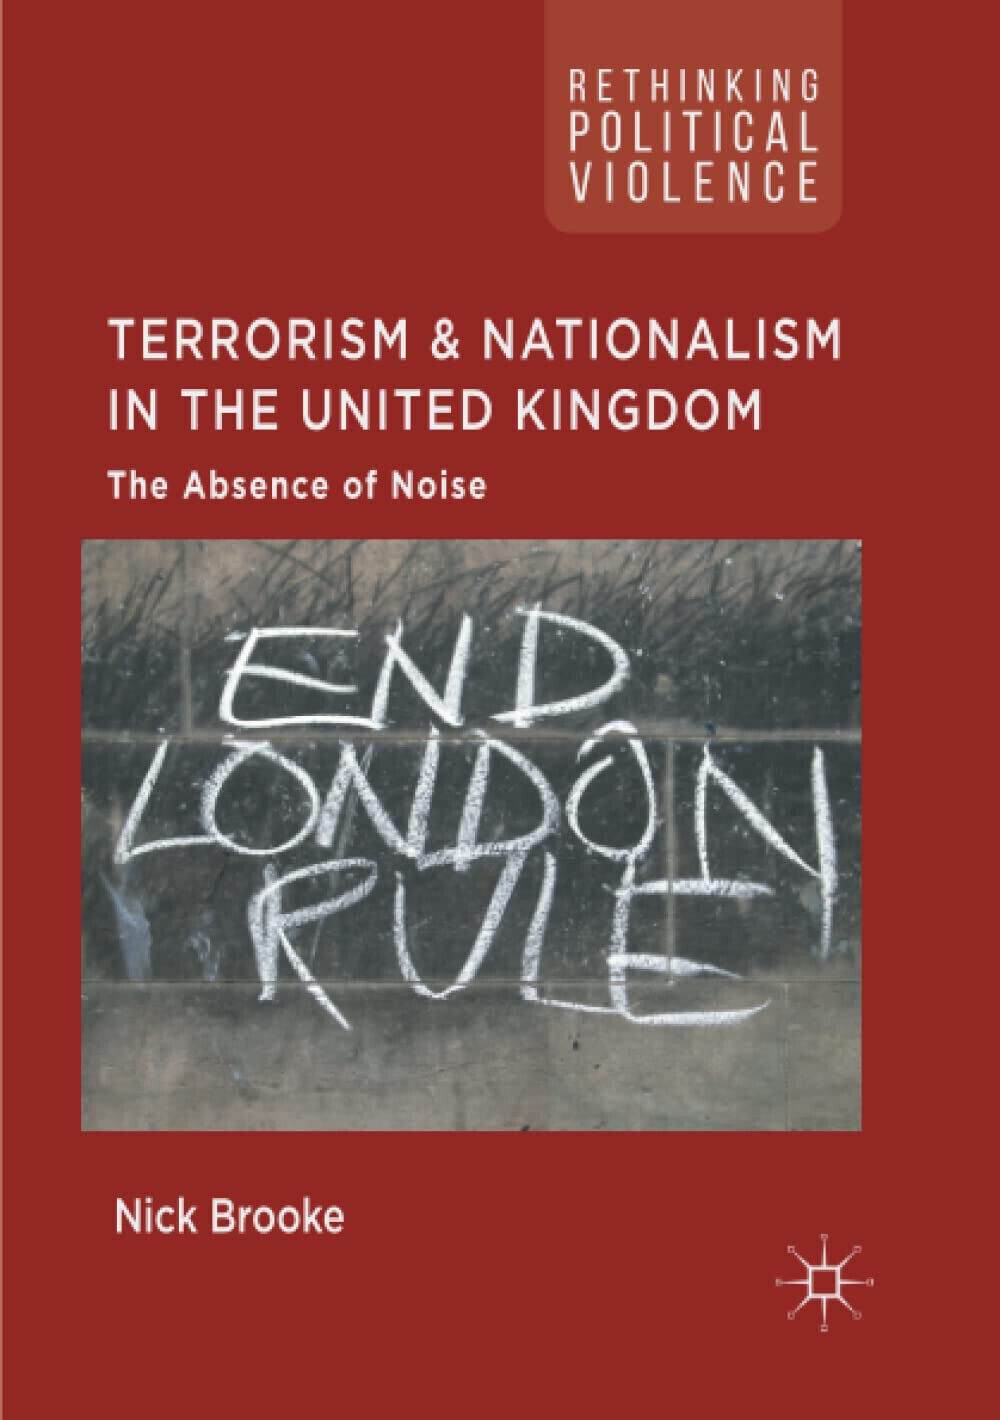 Terrorism and Nationalism in the United Kingdom - Nick Brooke - Palgrave 2019